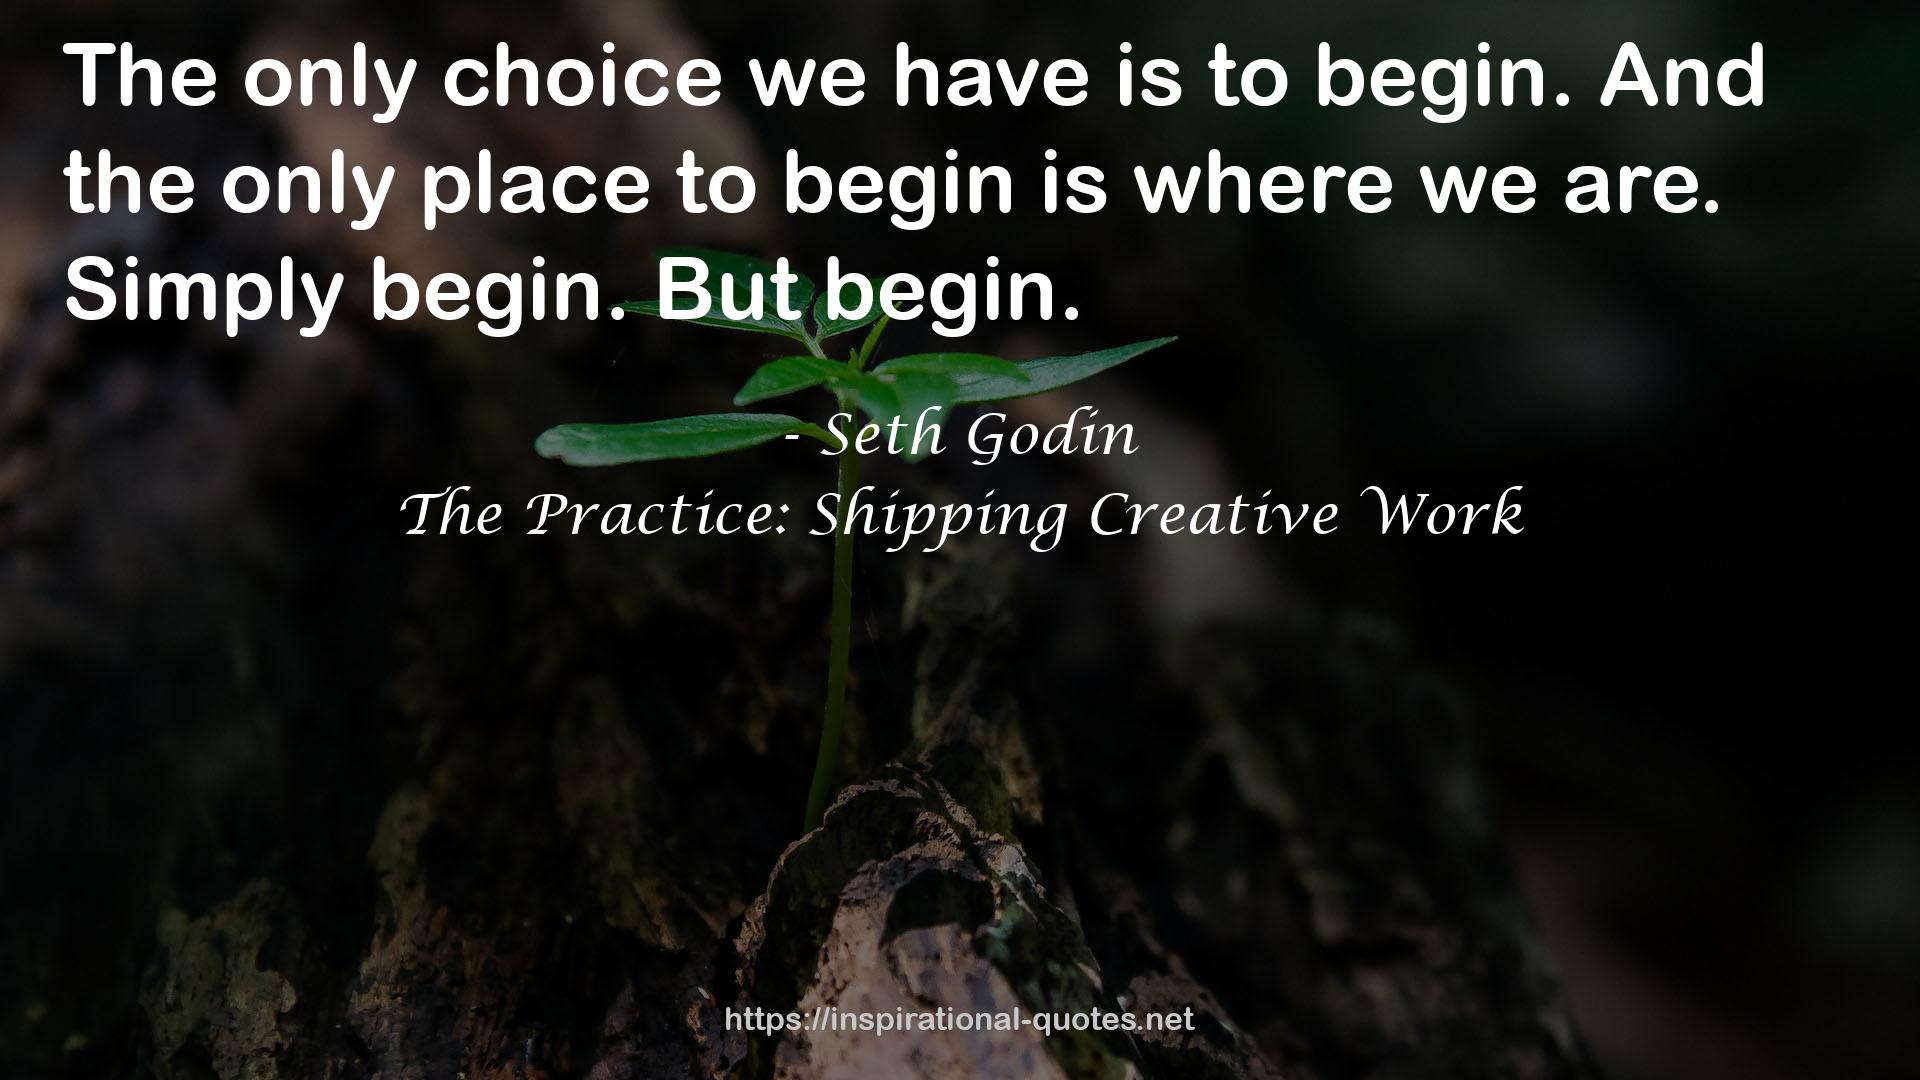 The Practice: Shipping Creative Work QUOTES